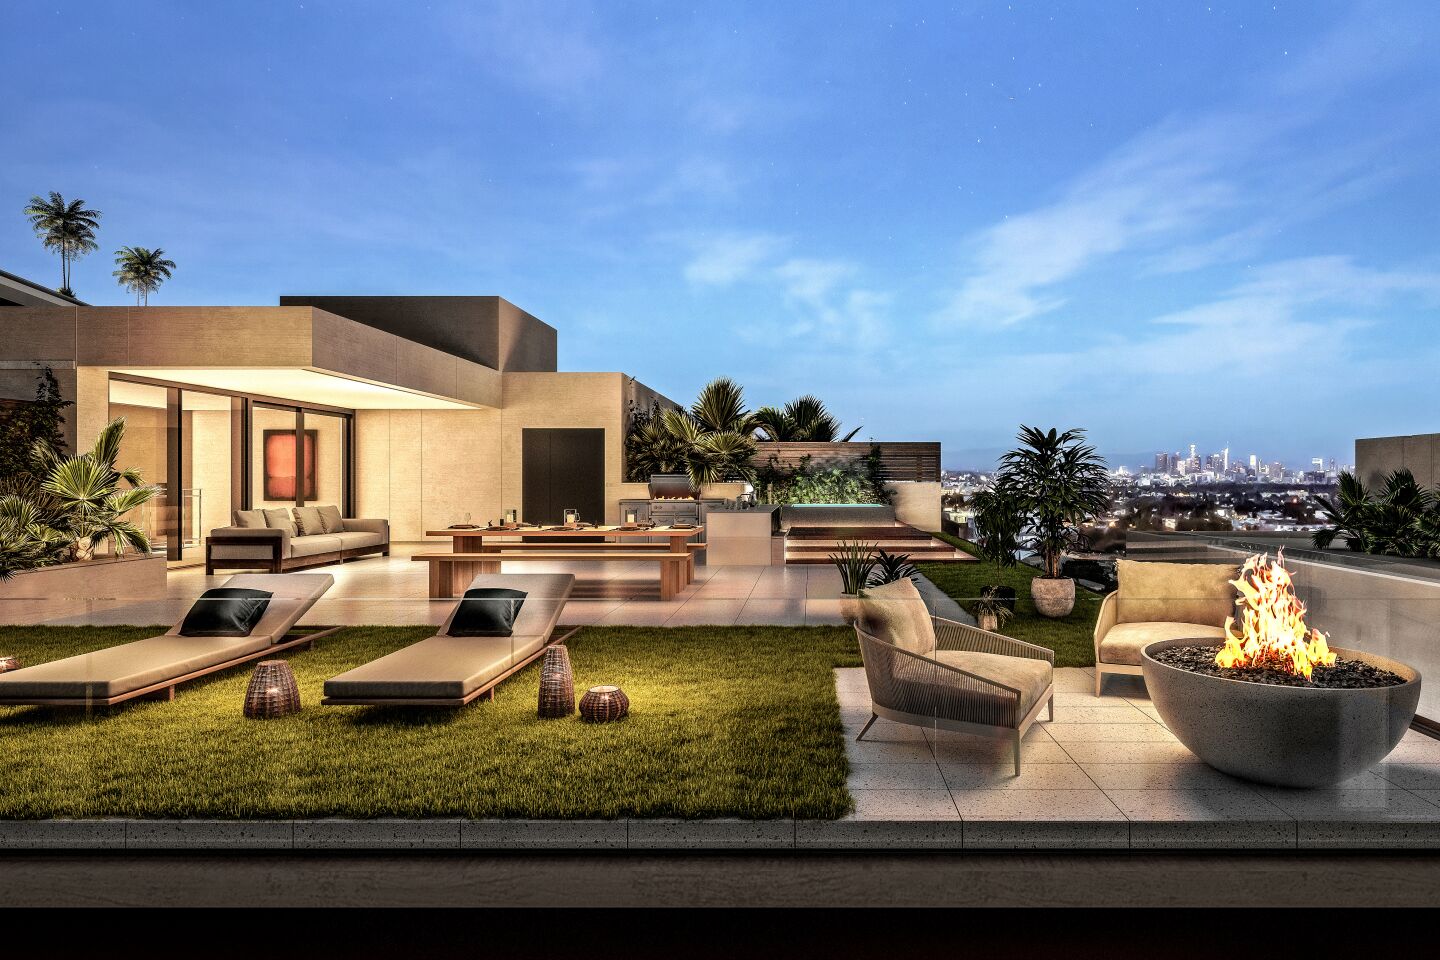 A rendering of the penthouse, with curated interiors and exterior amenities such as a private terrace and spa.